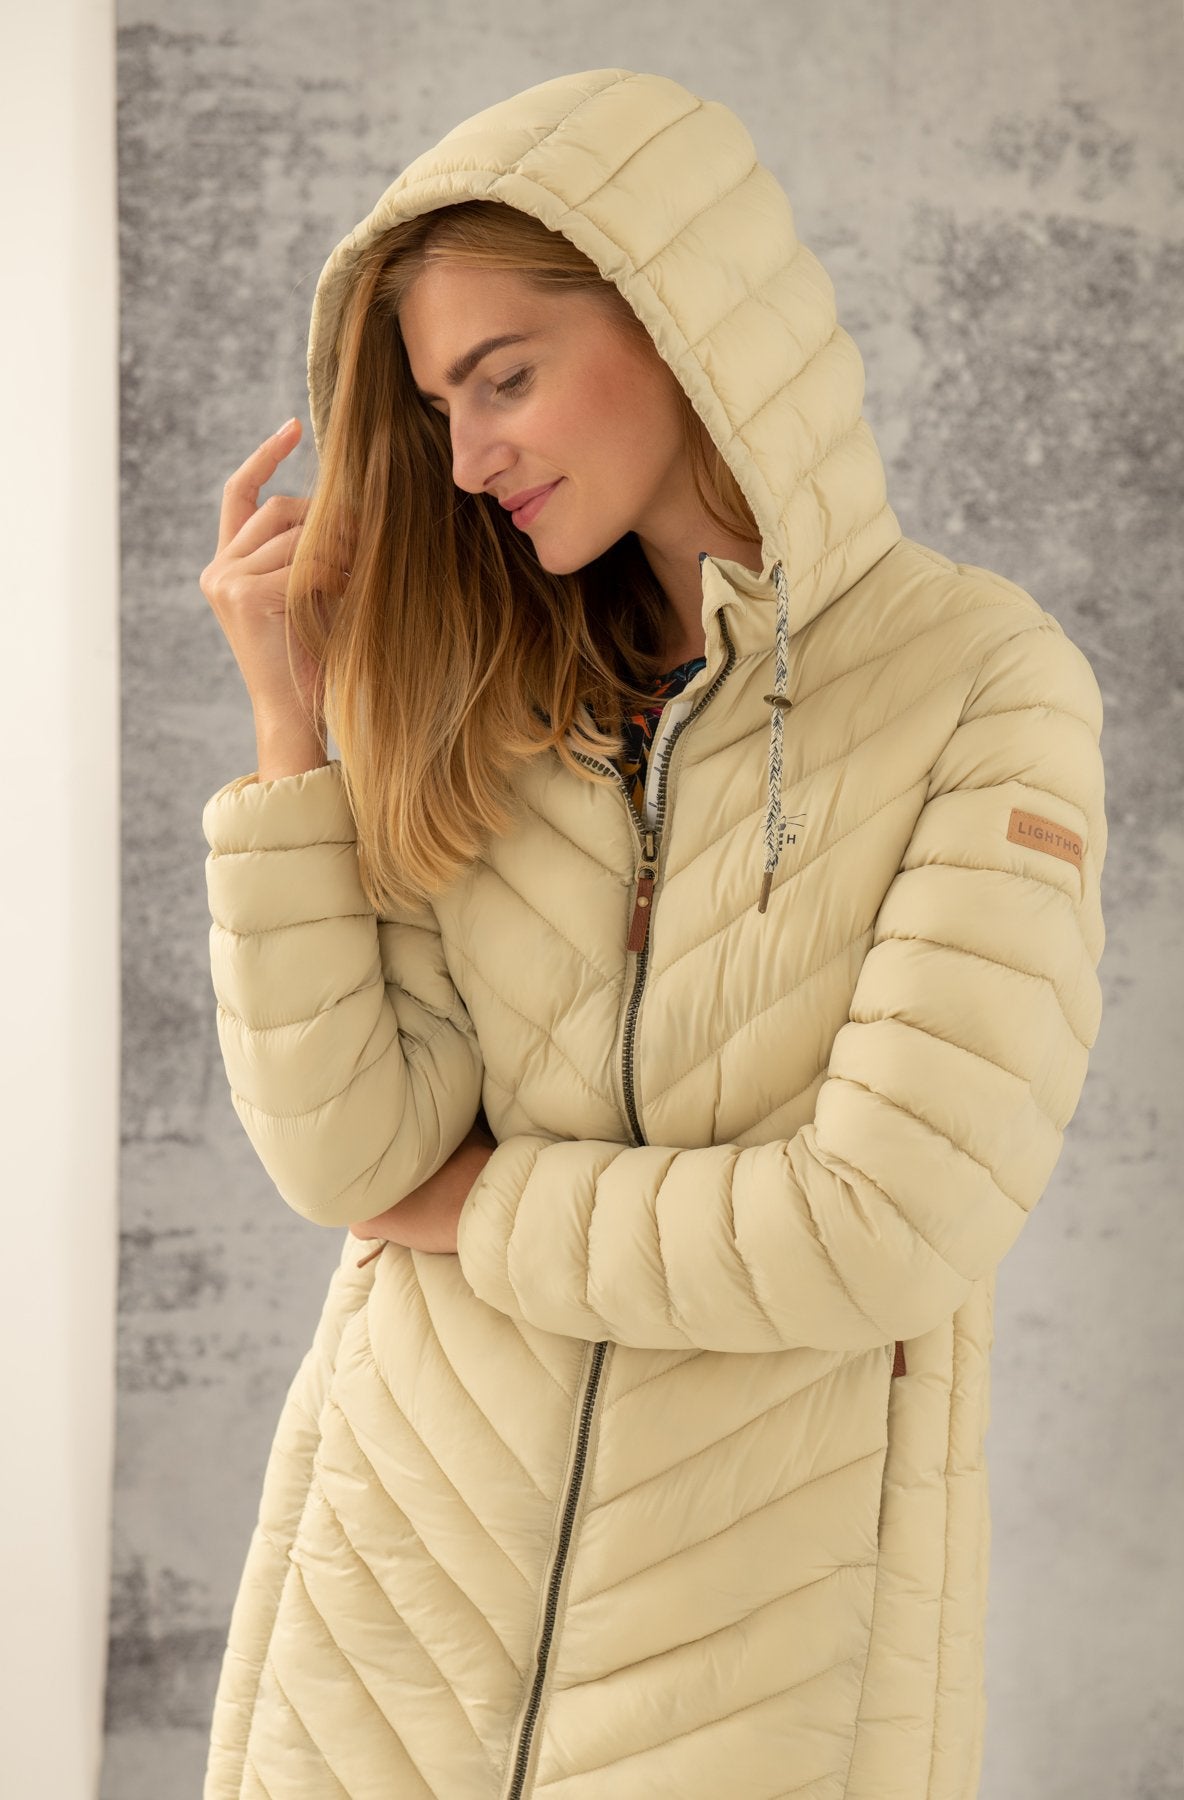 Lighthouse Laurel Mid-Length Coat in Almond